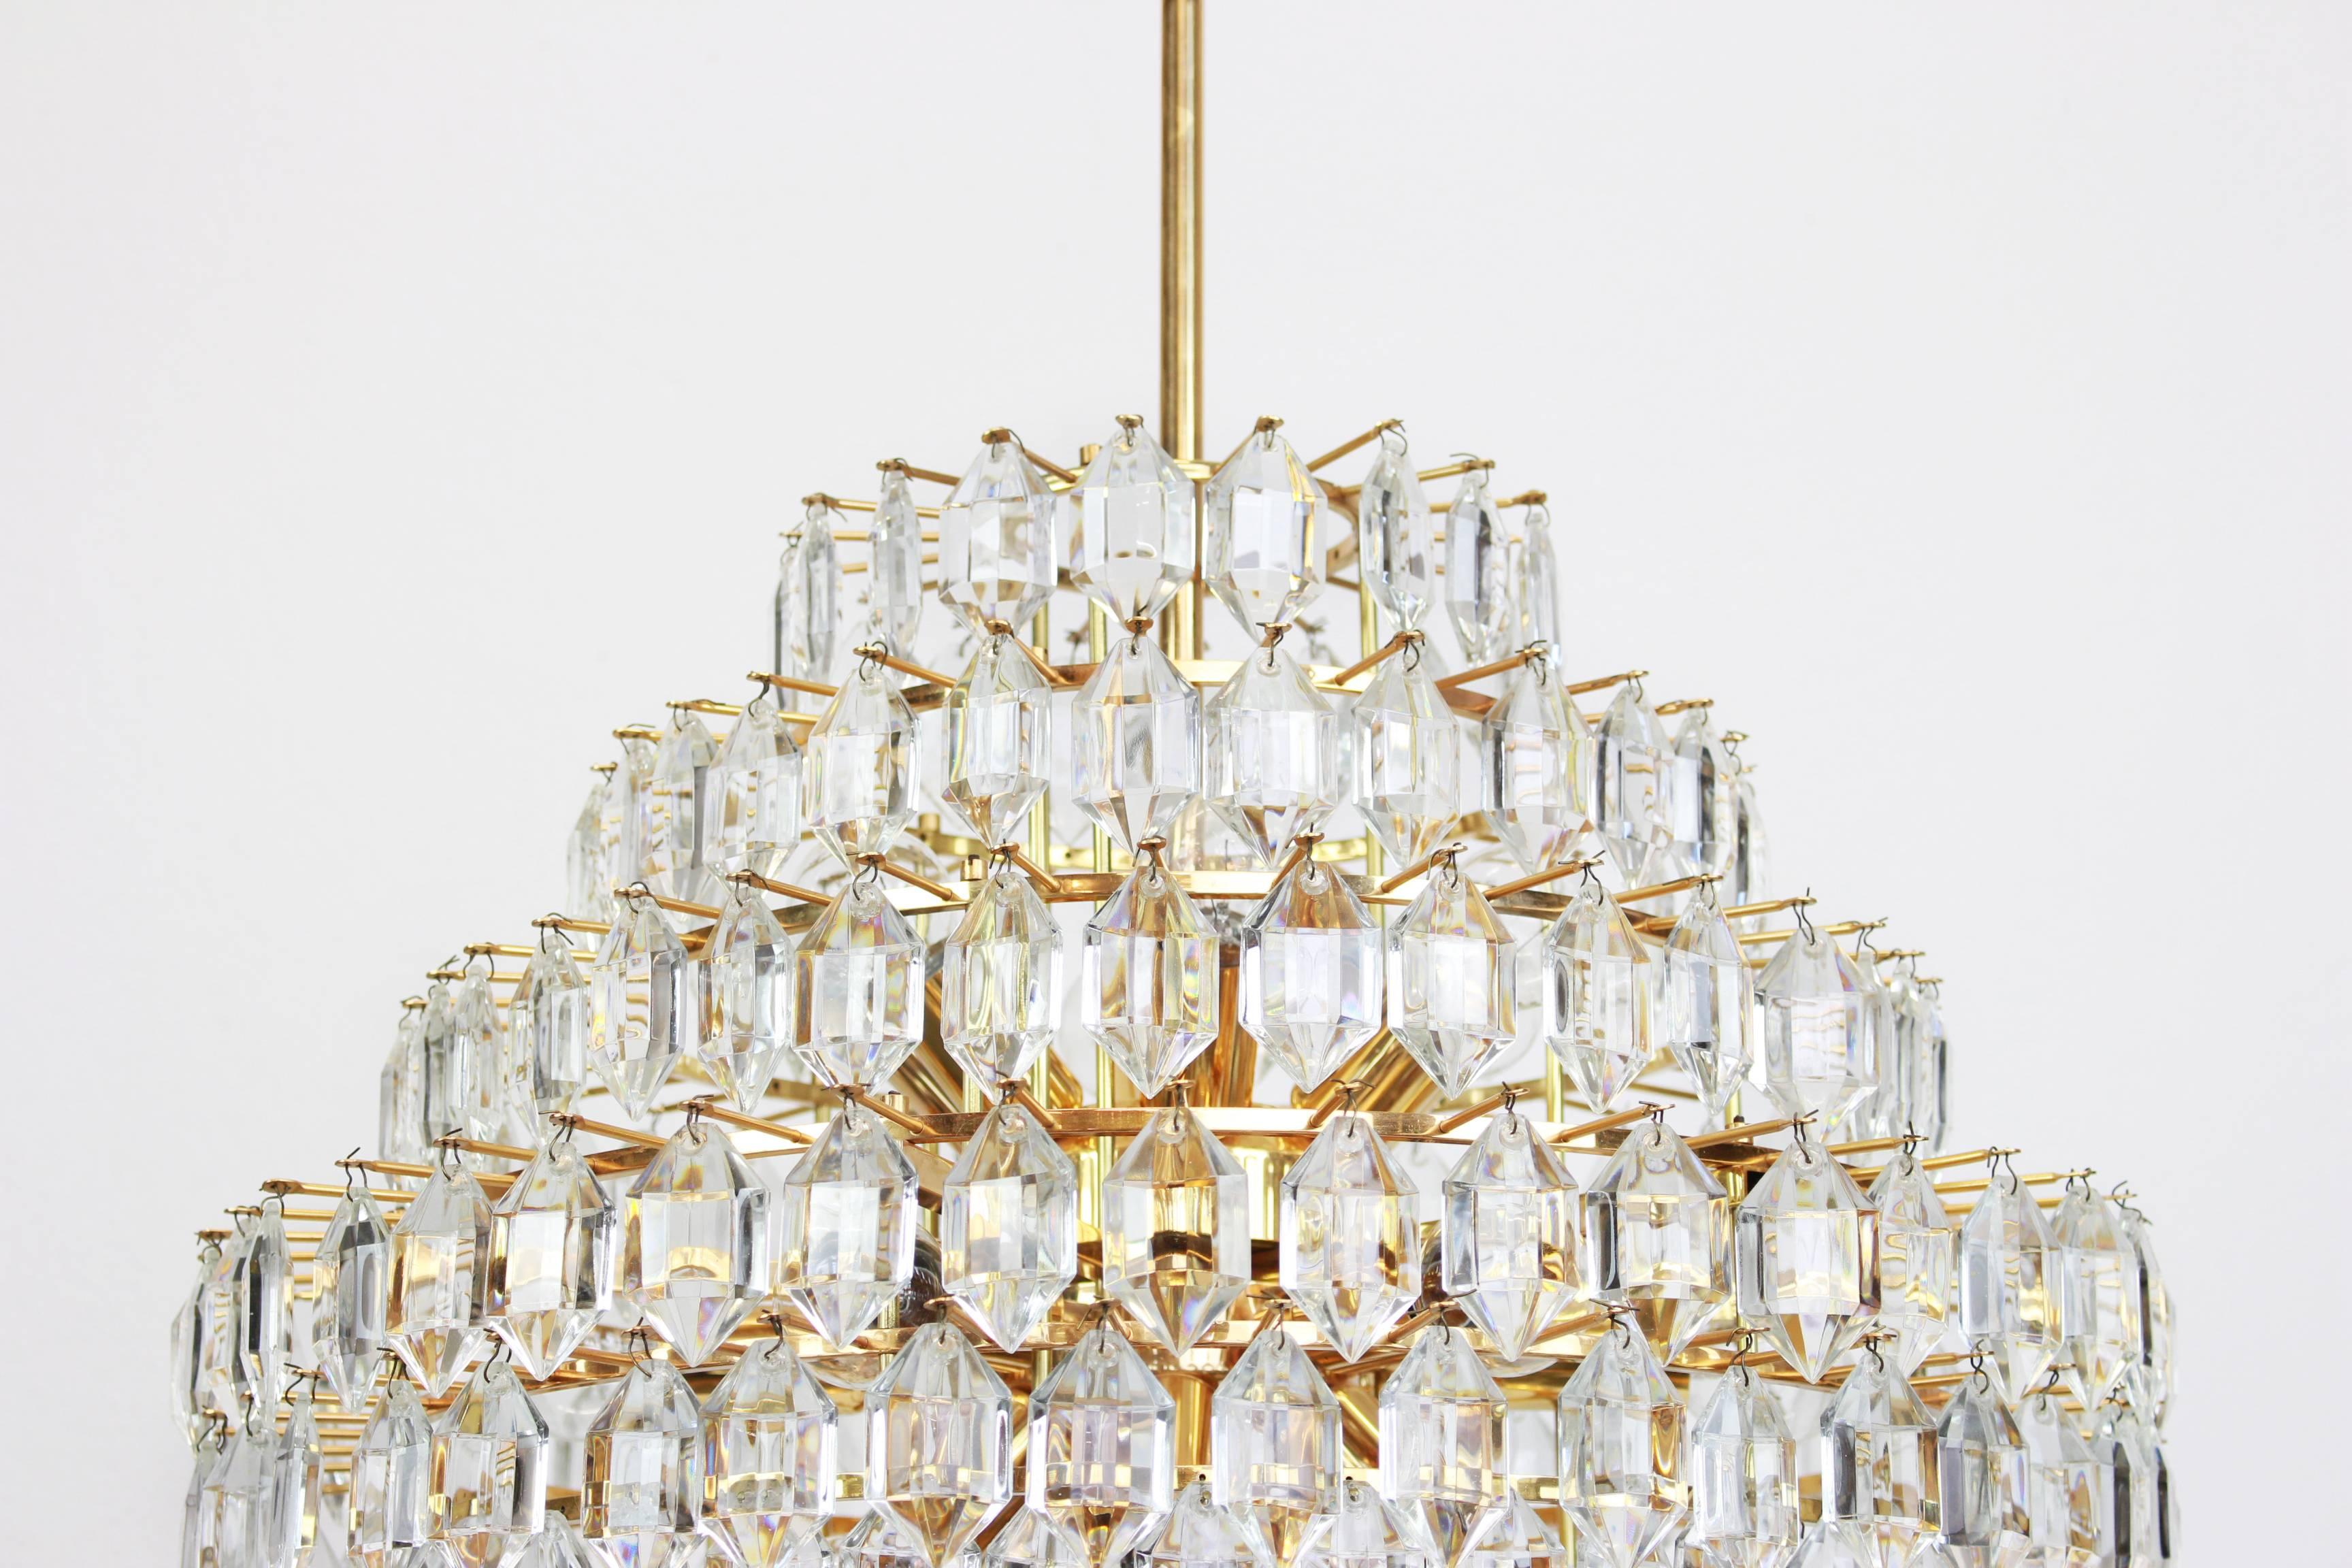 Midcentury Bakalowits chandelier, brass and crystal glass, Austria, 1960s.

A stunning nine-tier chandelier by Bakalowits & Sohne, Austria, manufactured in circa 1960-1969. A handmade and high-quality piece. The ceiling fixture and the frame are